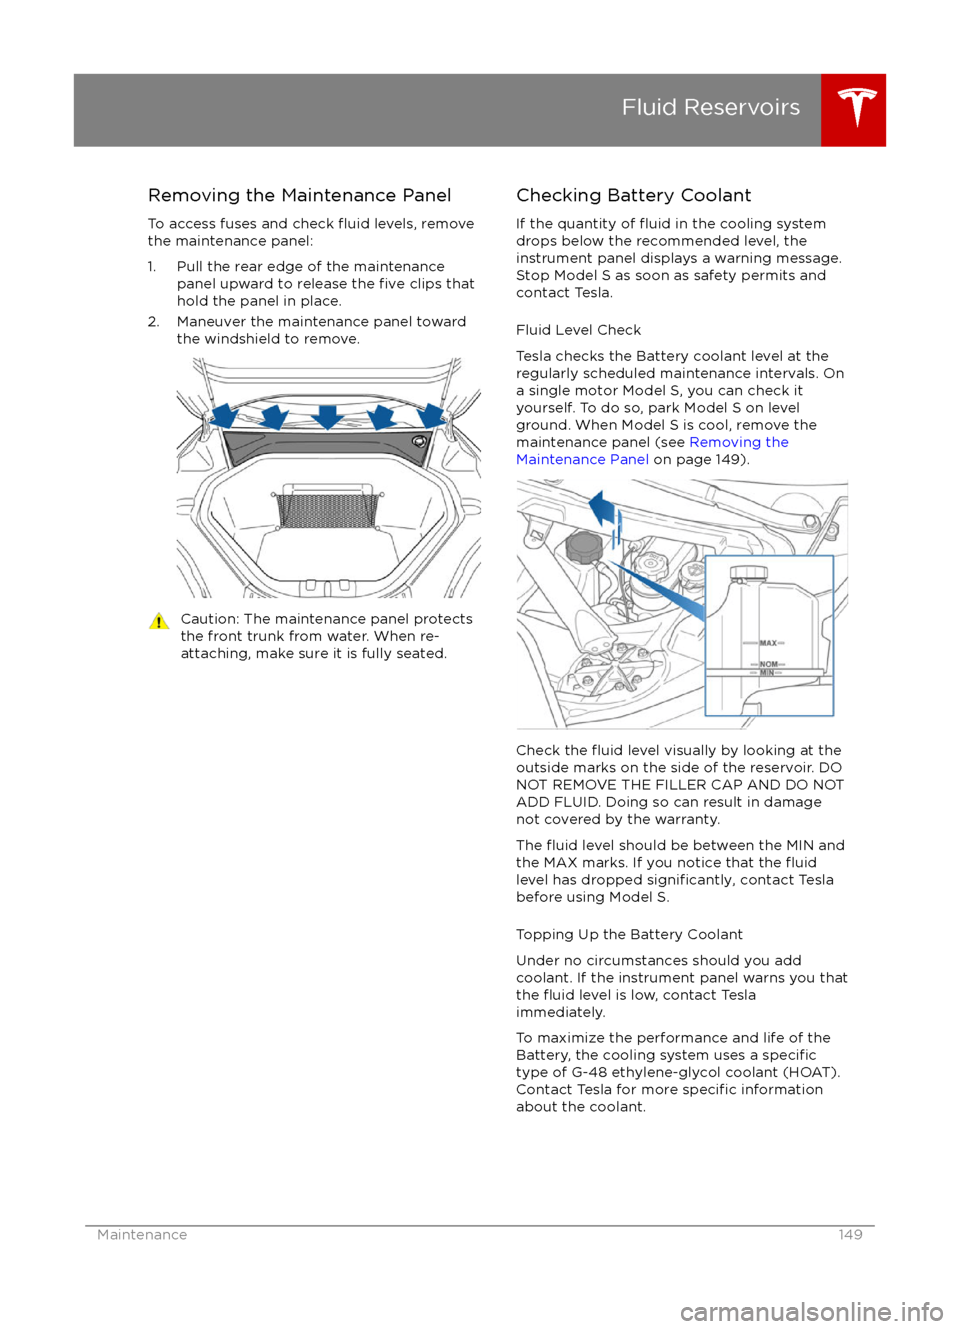 TESLA MODEL S 2016  Owners Manual Removing the Maintenance Panel
To access fuses and check 
fluid levels, remove
the maintenance panel:
1. Pull the rear edge of the maintenance panel upward to release the 
five clips that
hold the pan